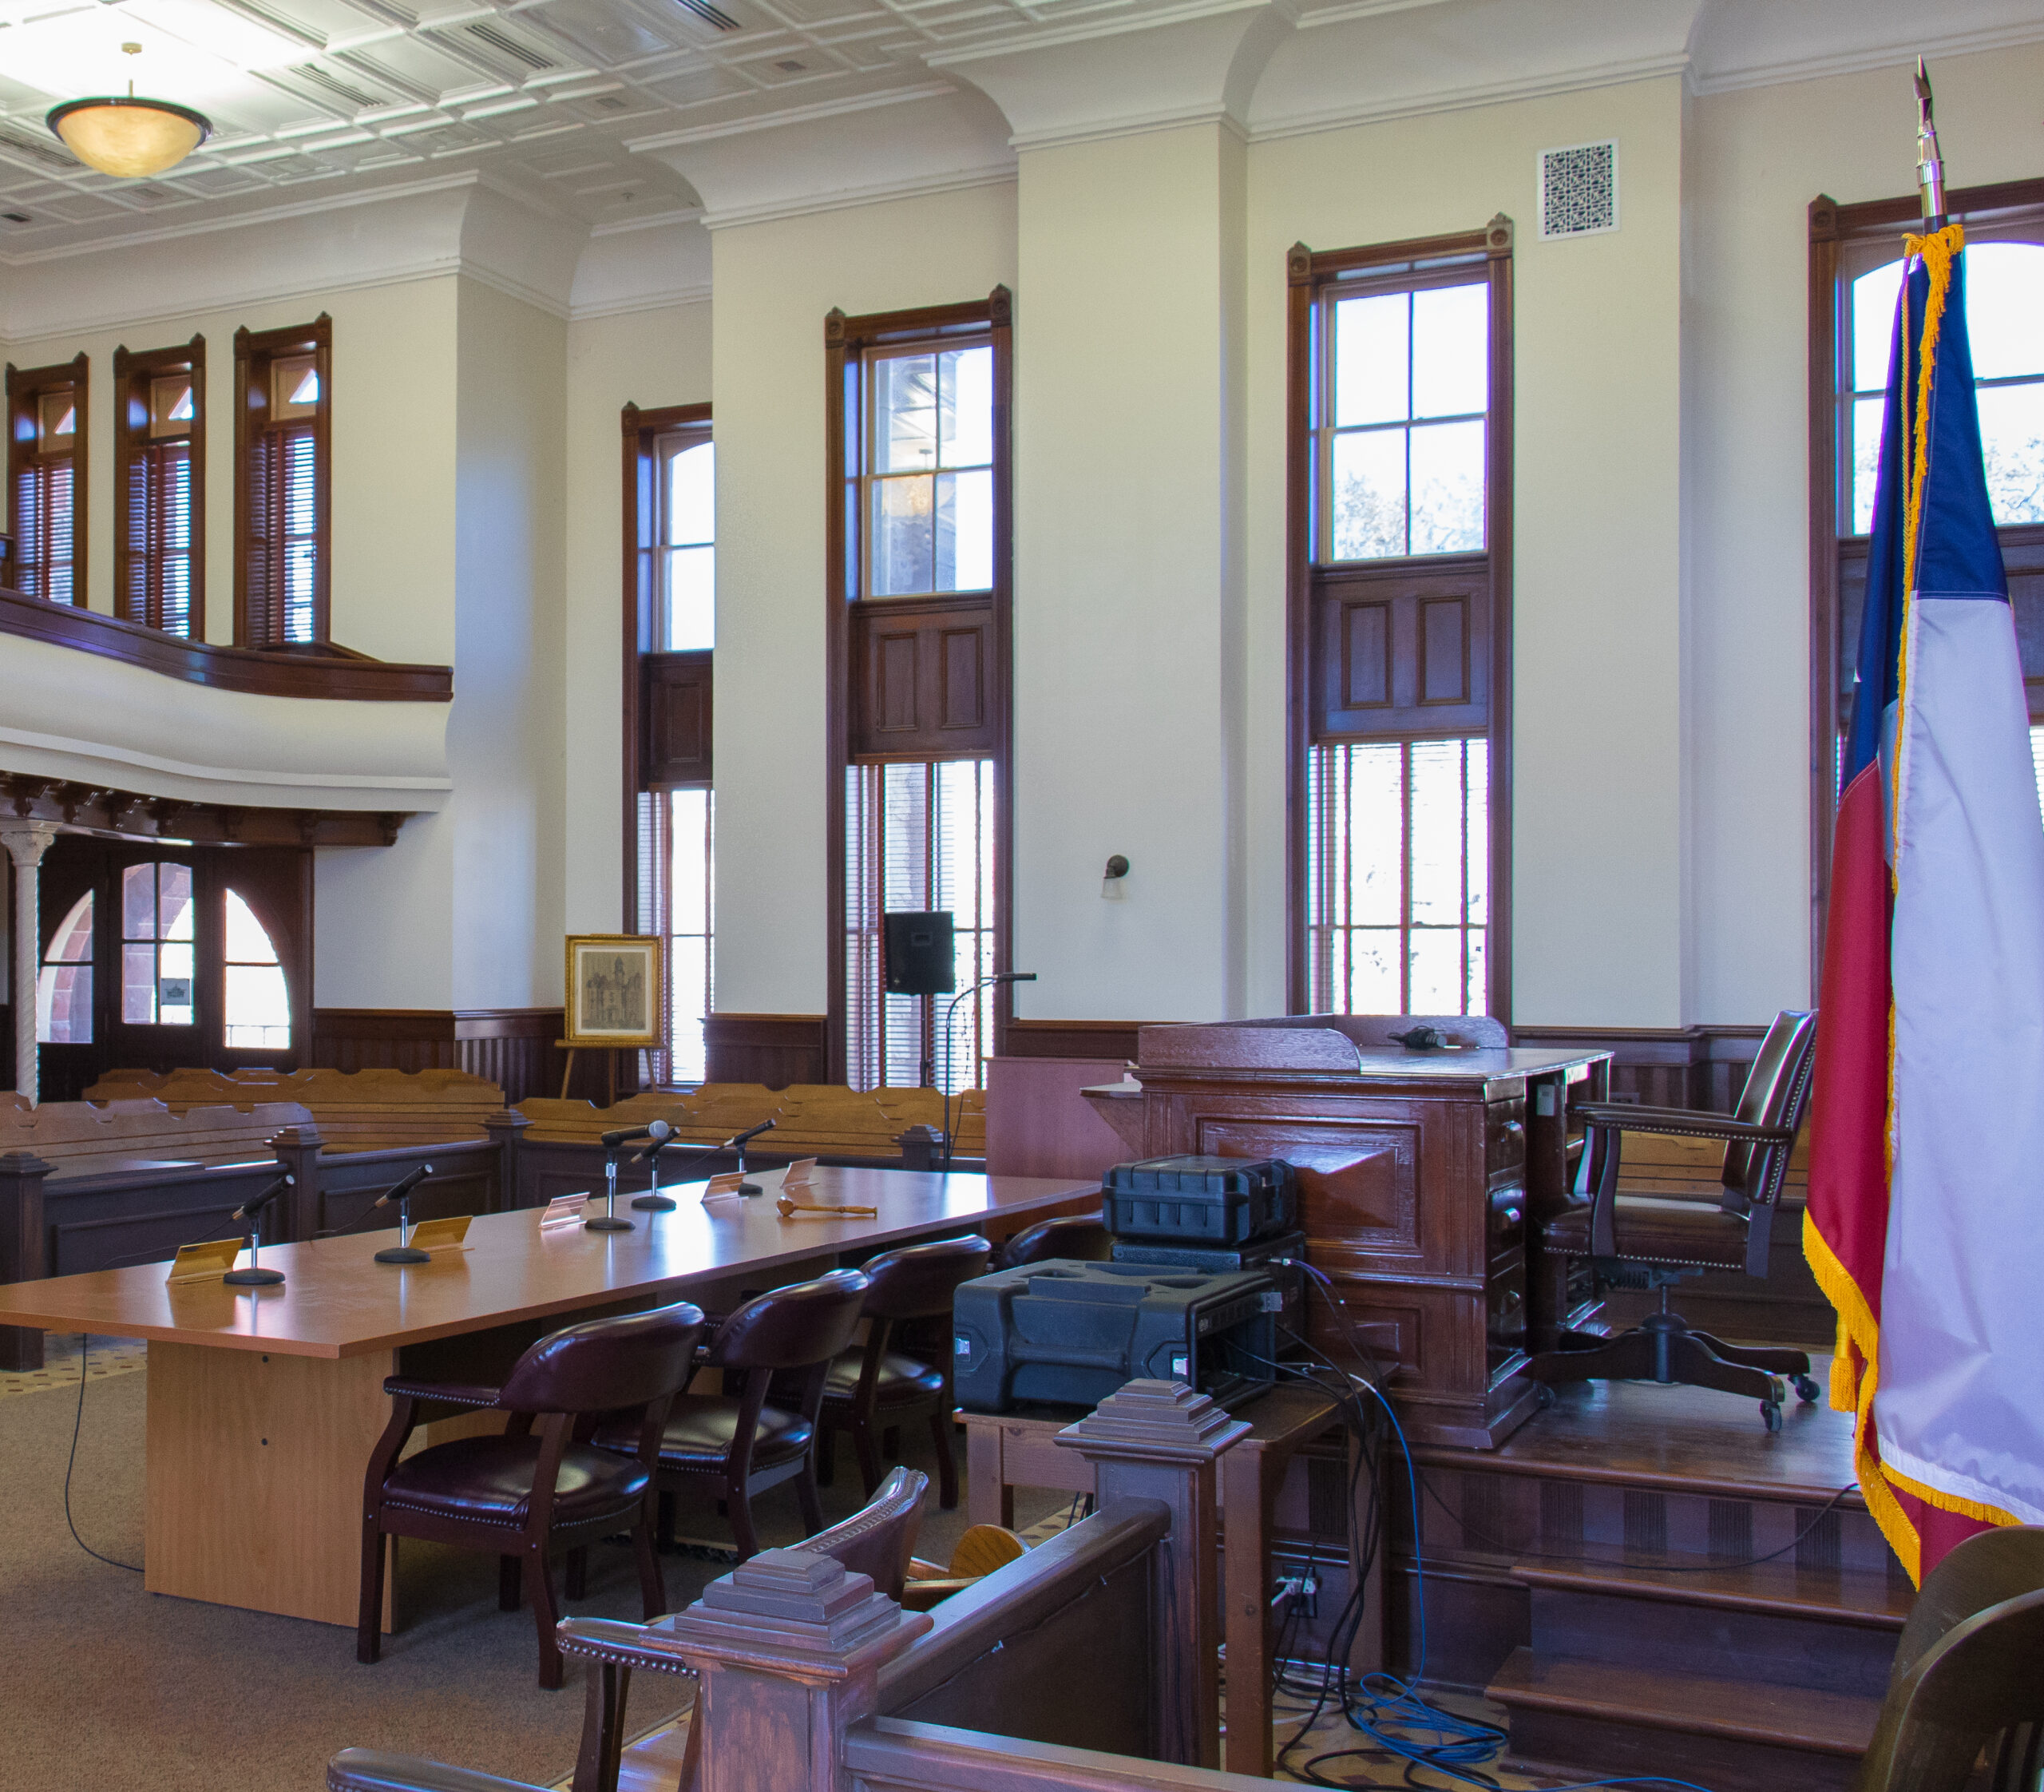 A typical Texas courtroom stands empty. Photographed in Lockhart.